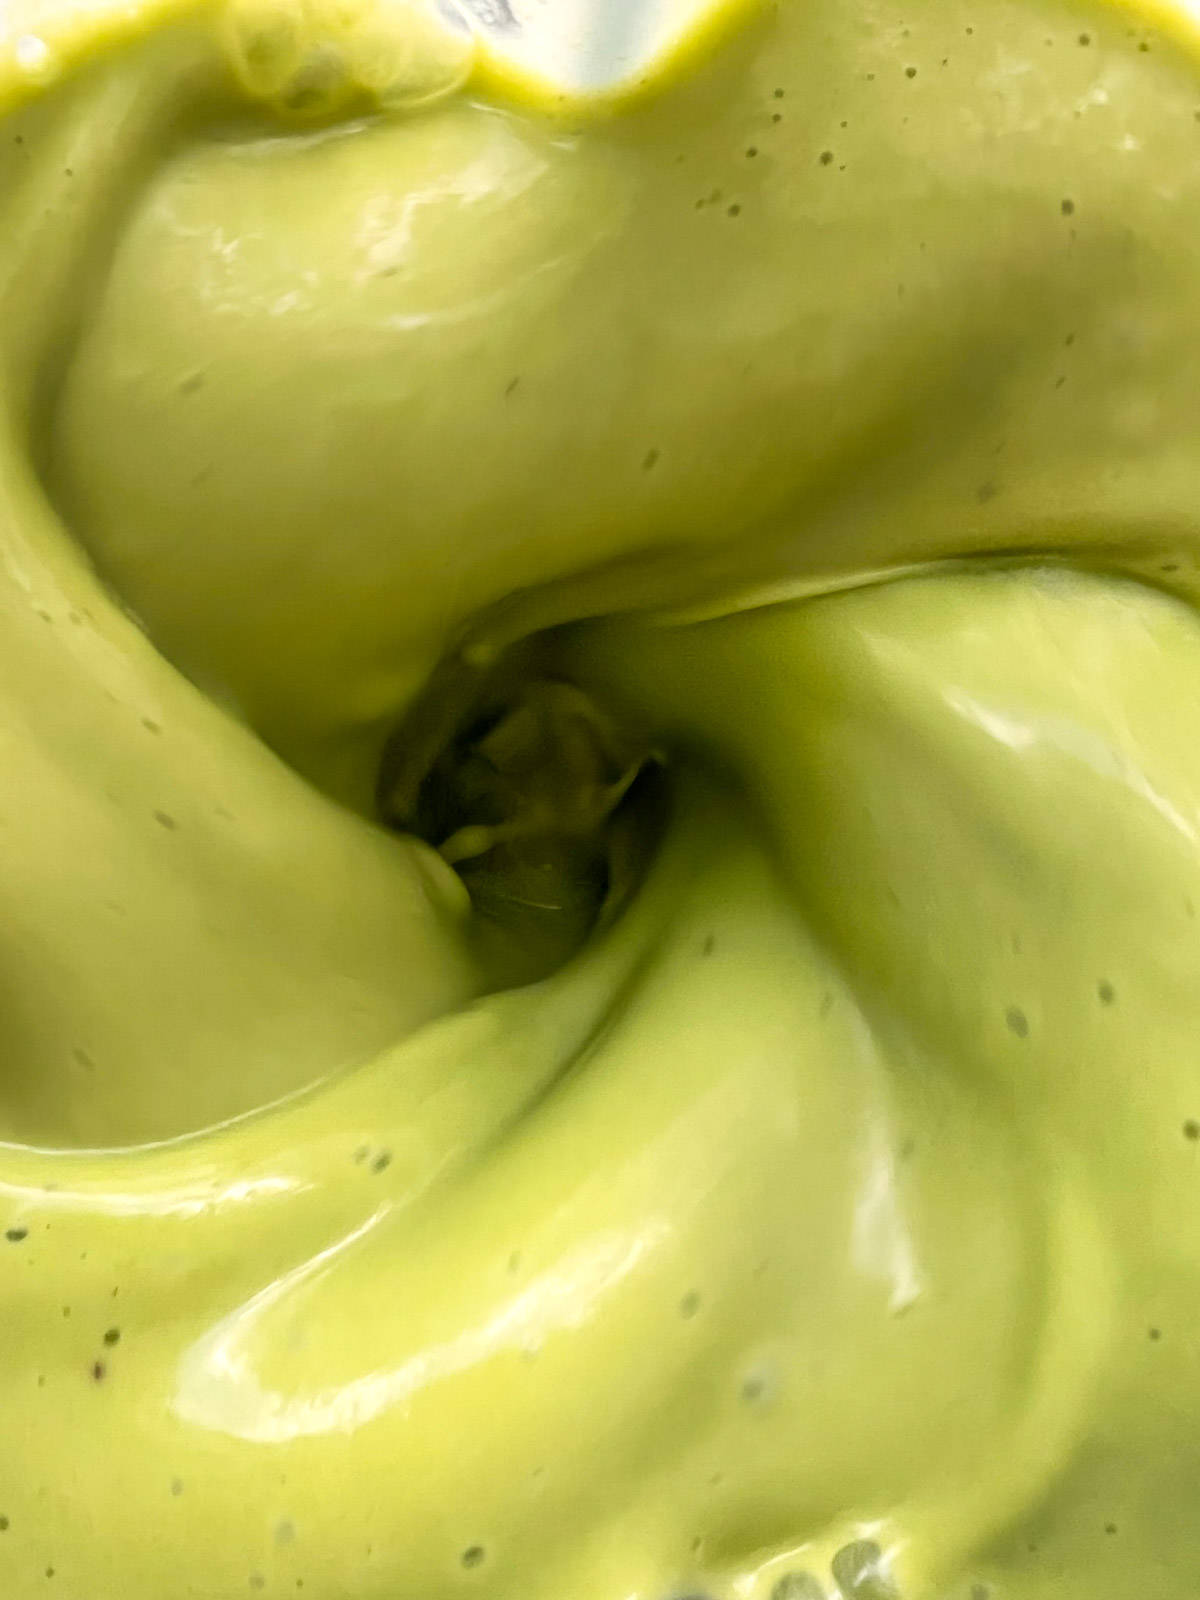 A close up image of a green smoothie in the blender.